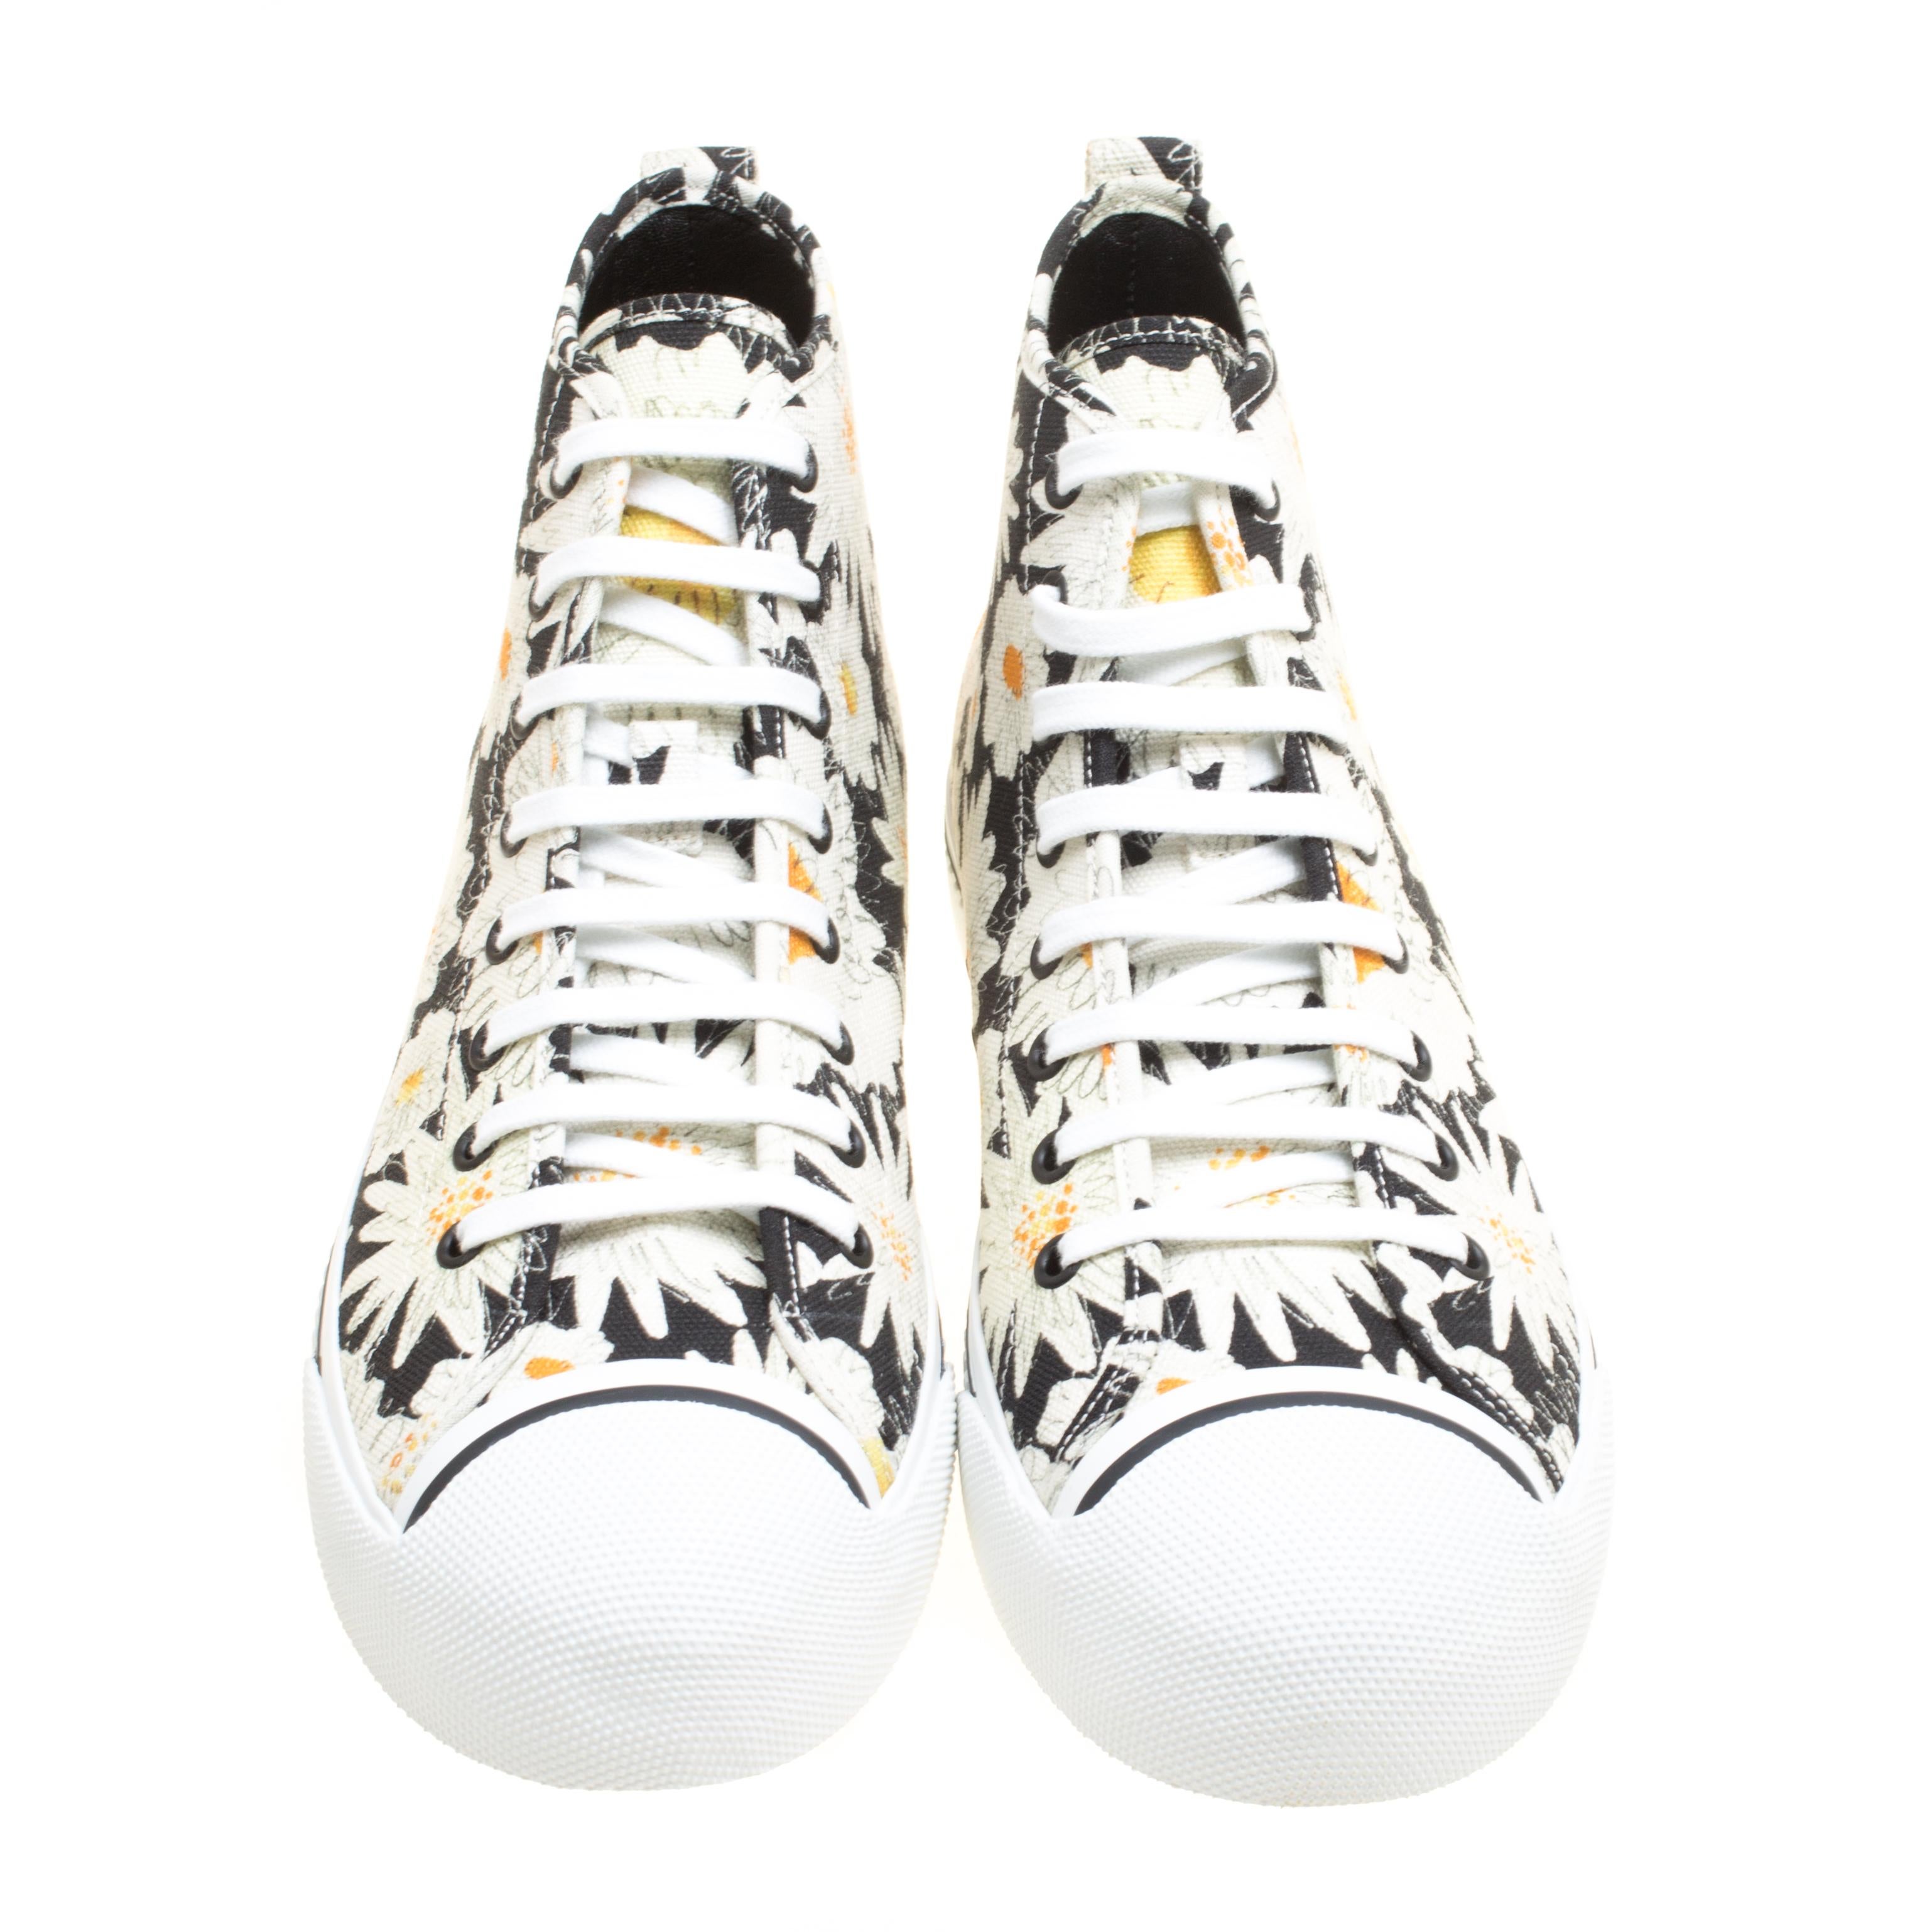 White Burberry Black Floral Print Canvas Kingly High Top Sneakers Size 44